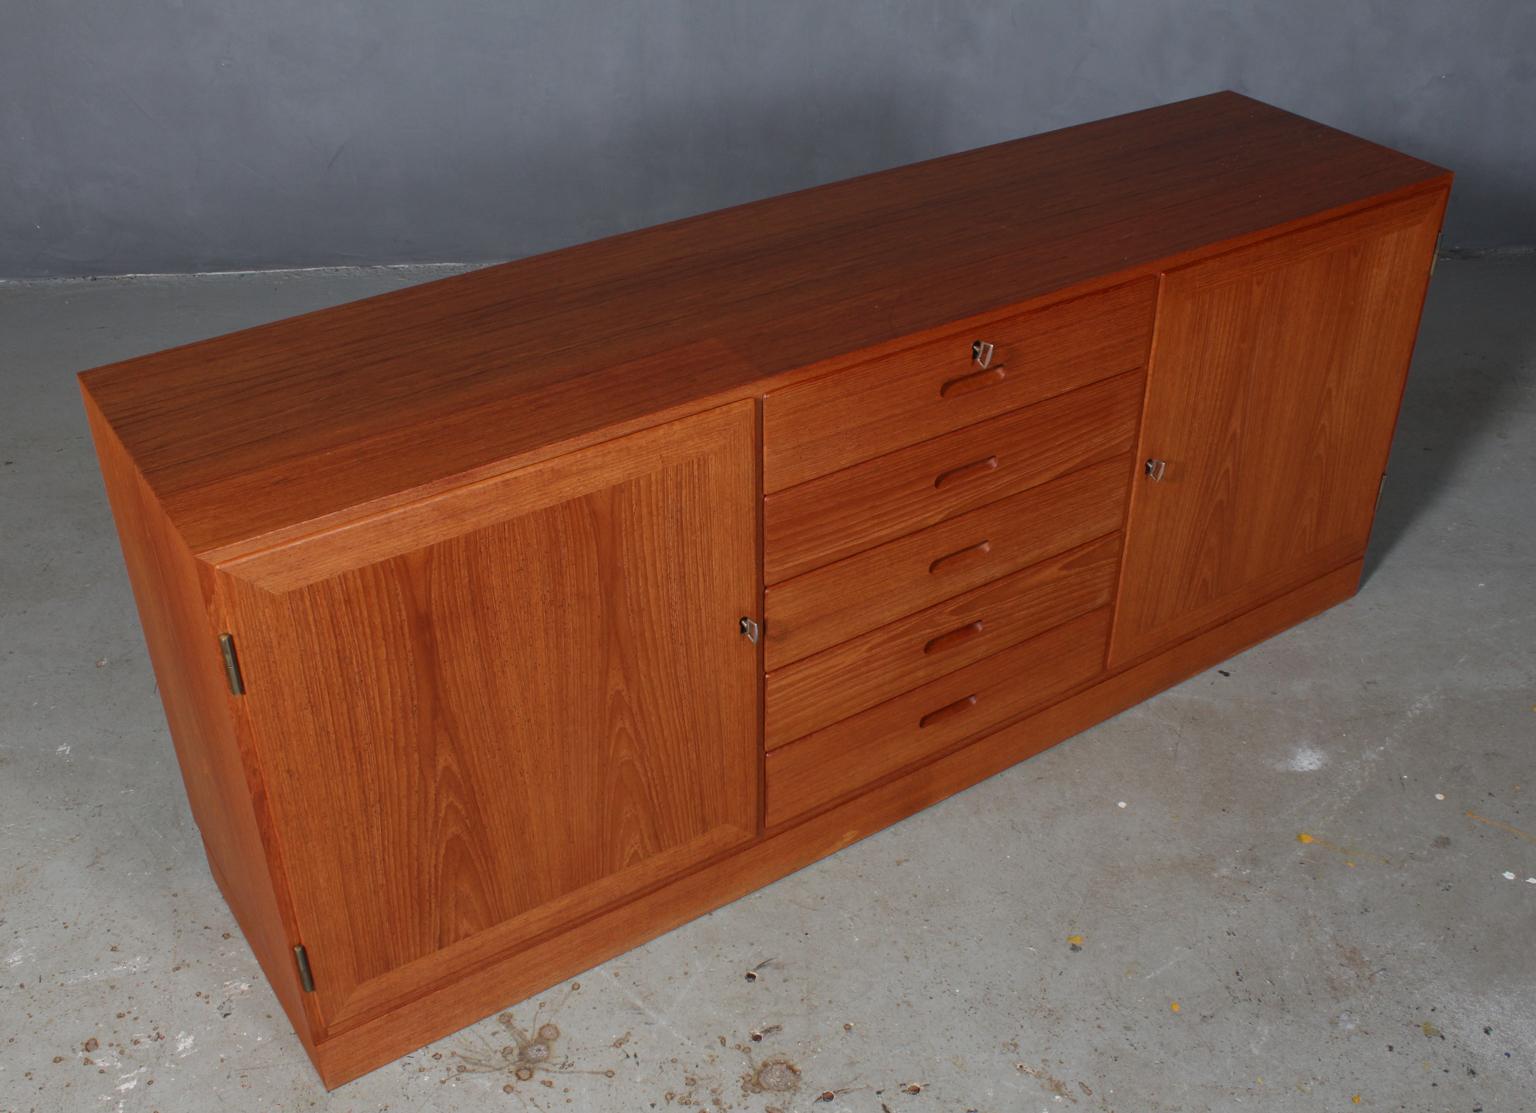 Kai Winding cabinet in partly solid teak. Drawers and doors with shelves behind.

With locks and keys.